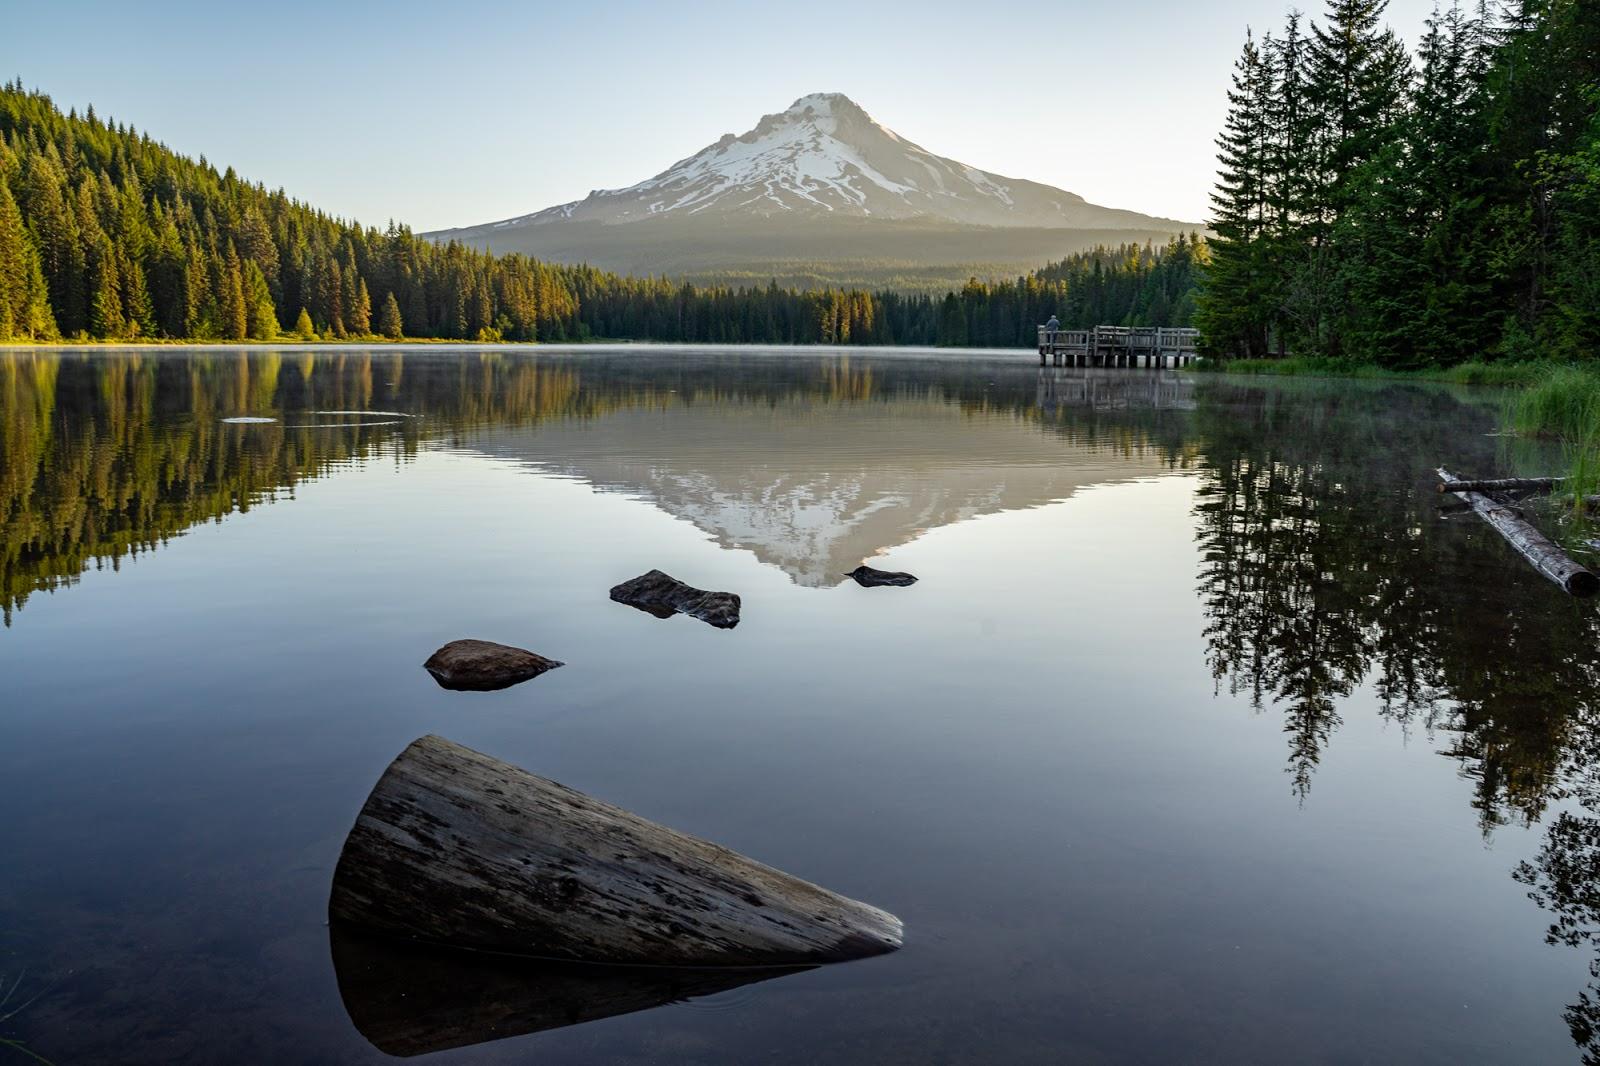 Places to Visit in the Pacific Northwest